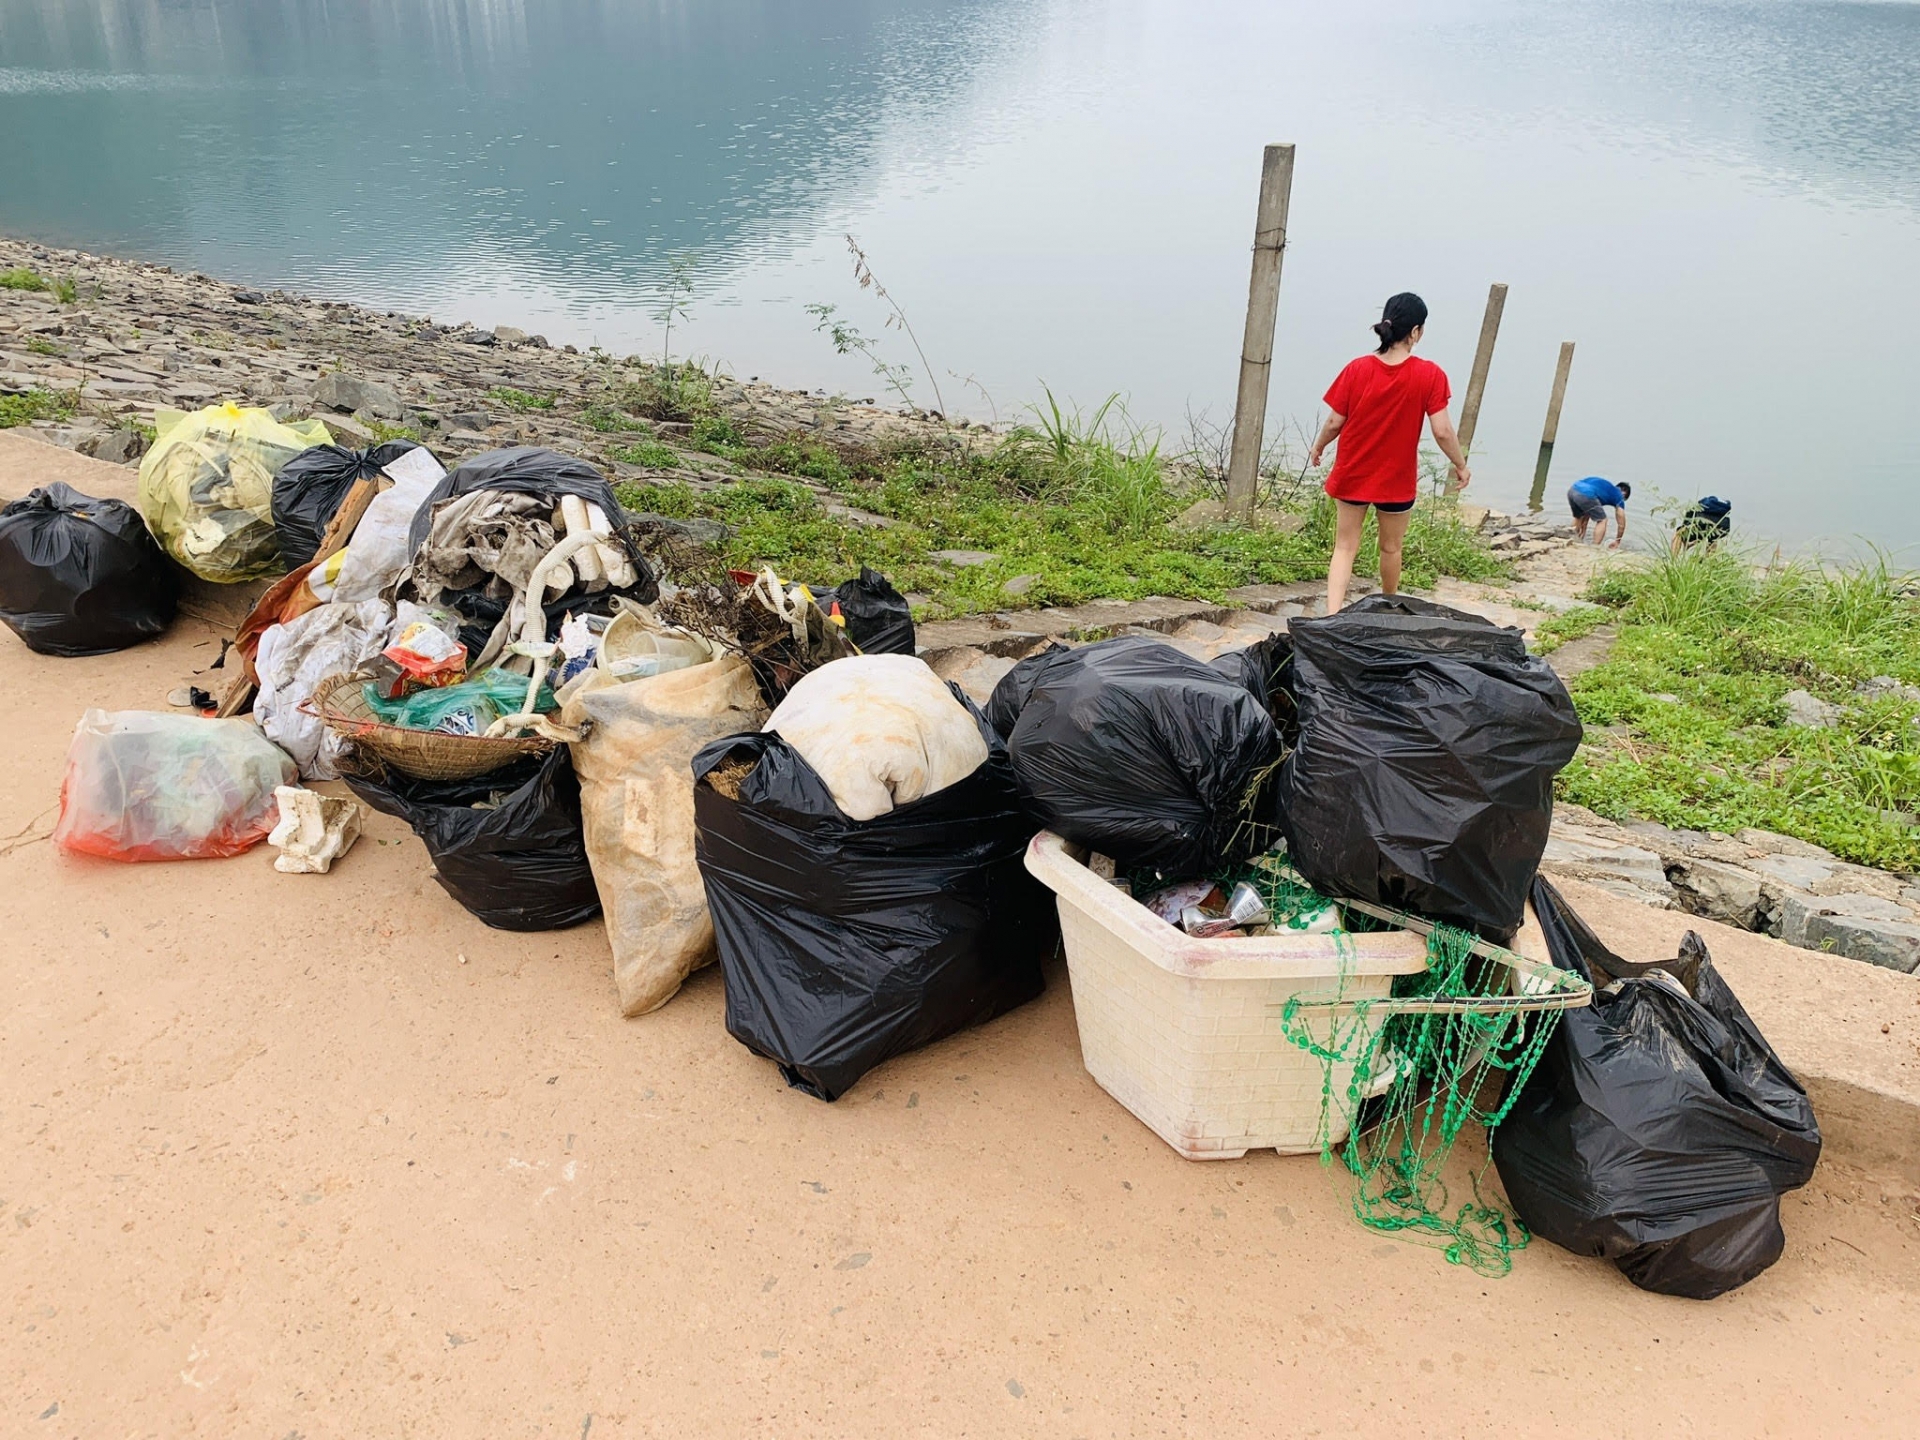 Before Leaving Vietnam, Expat Takes Out the Trash